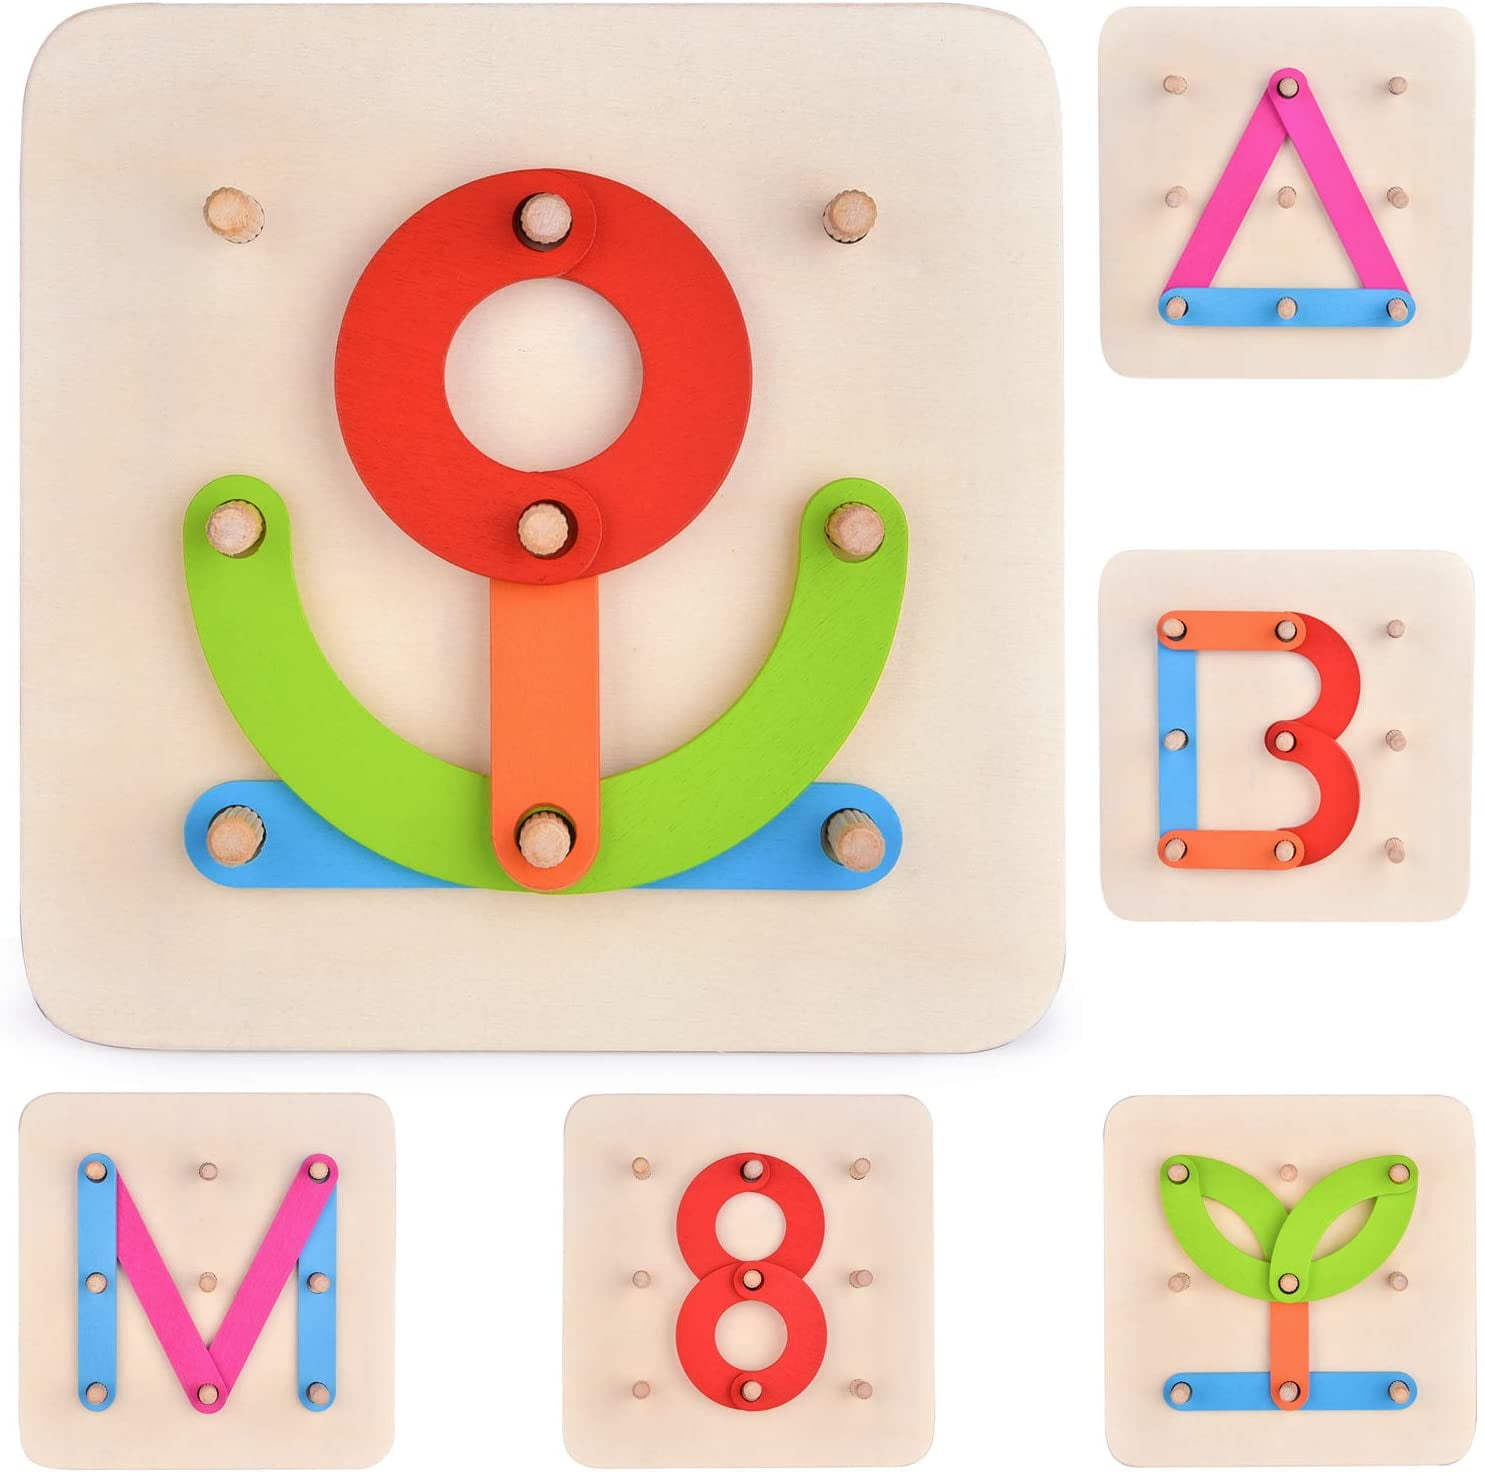 Educational Toys Letter Board Set for Boys & Girls 27 PCs Preschool Learning Toys Stacking Blocks Wooden Letters Number Shape Puzzles for Kids 